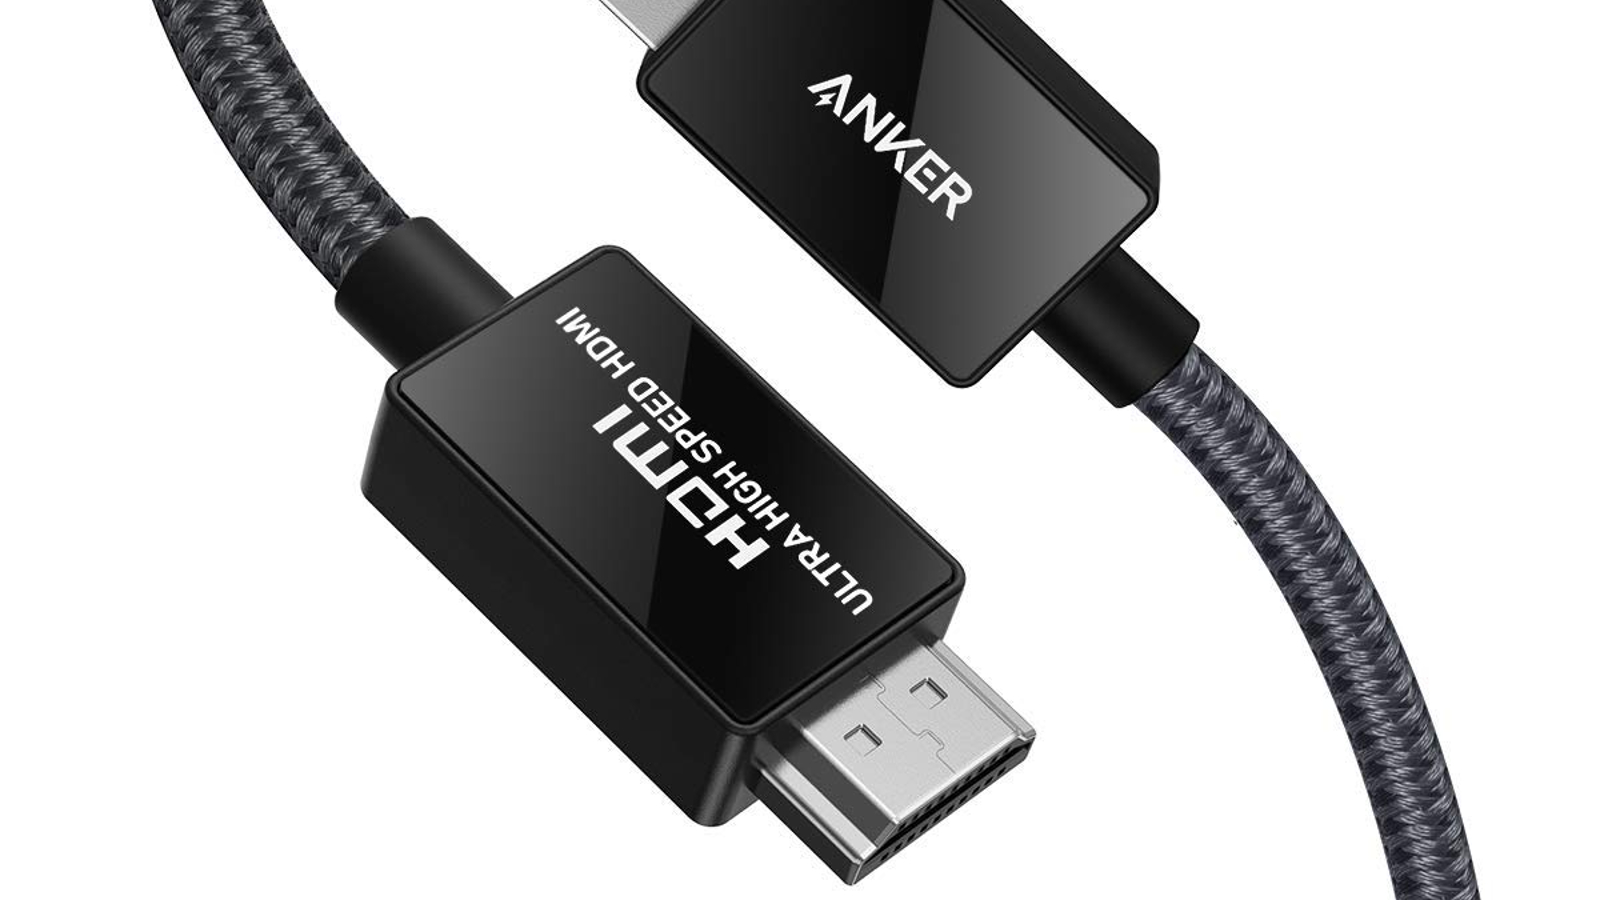 Anker 8K HDMI Cable - Best for speed